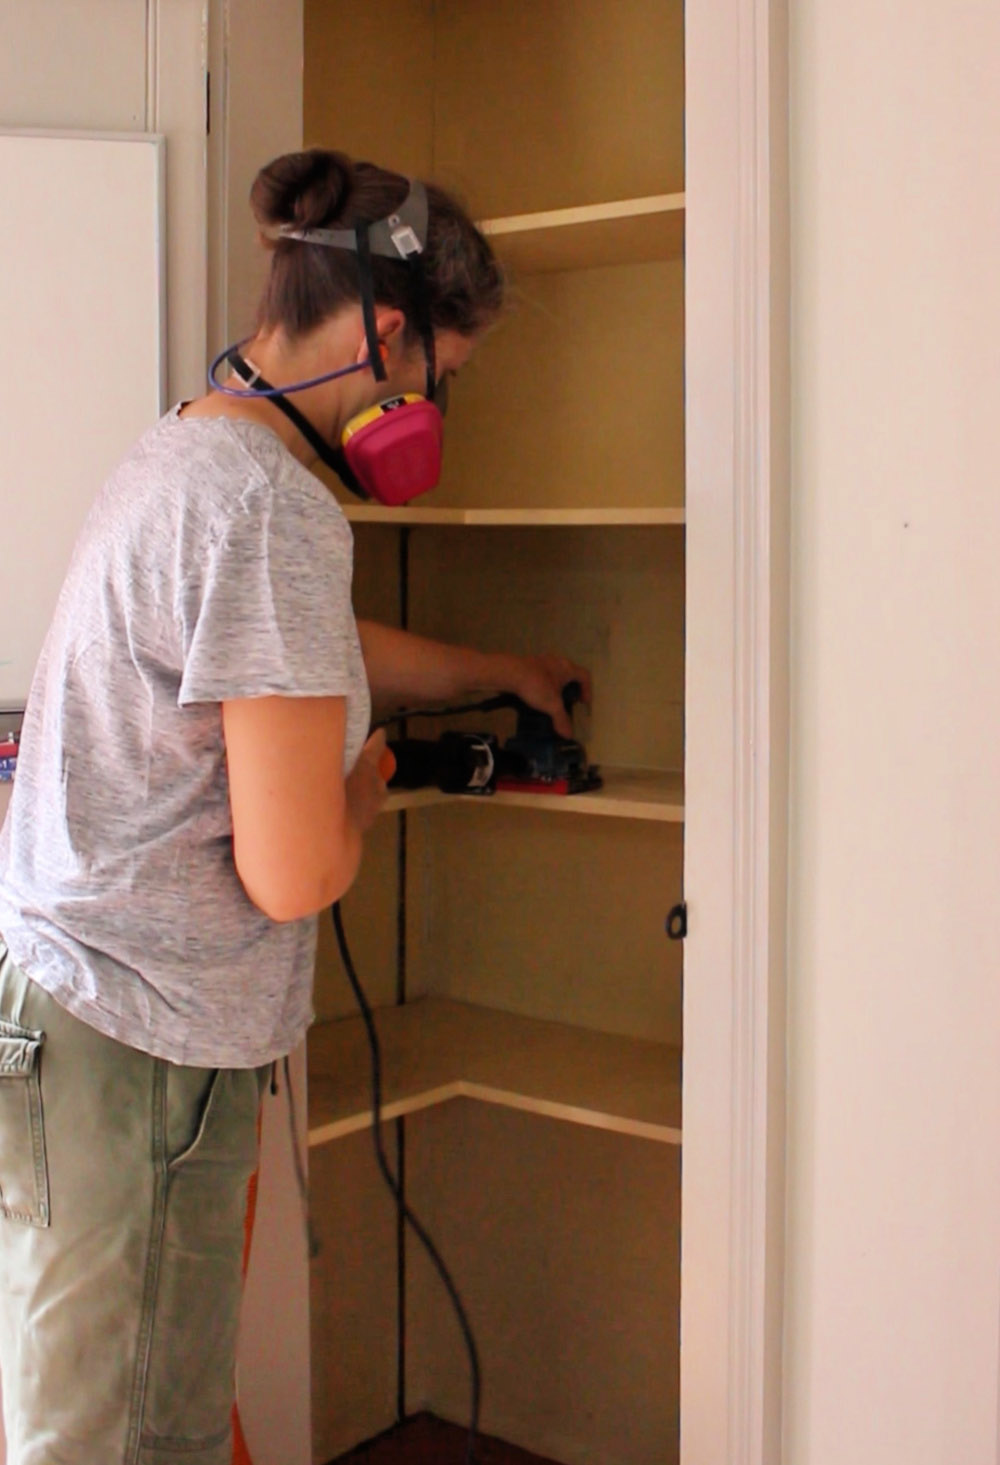 A woman sanding shelves in a pantry.